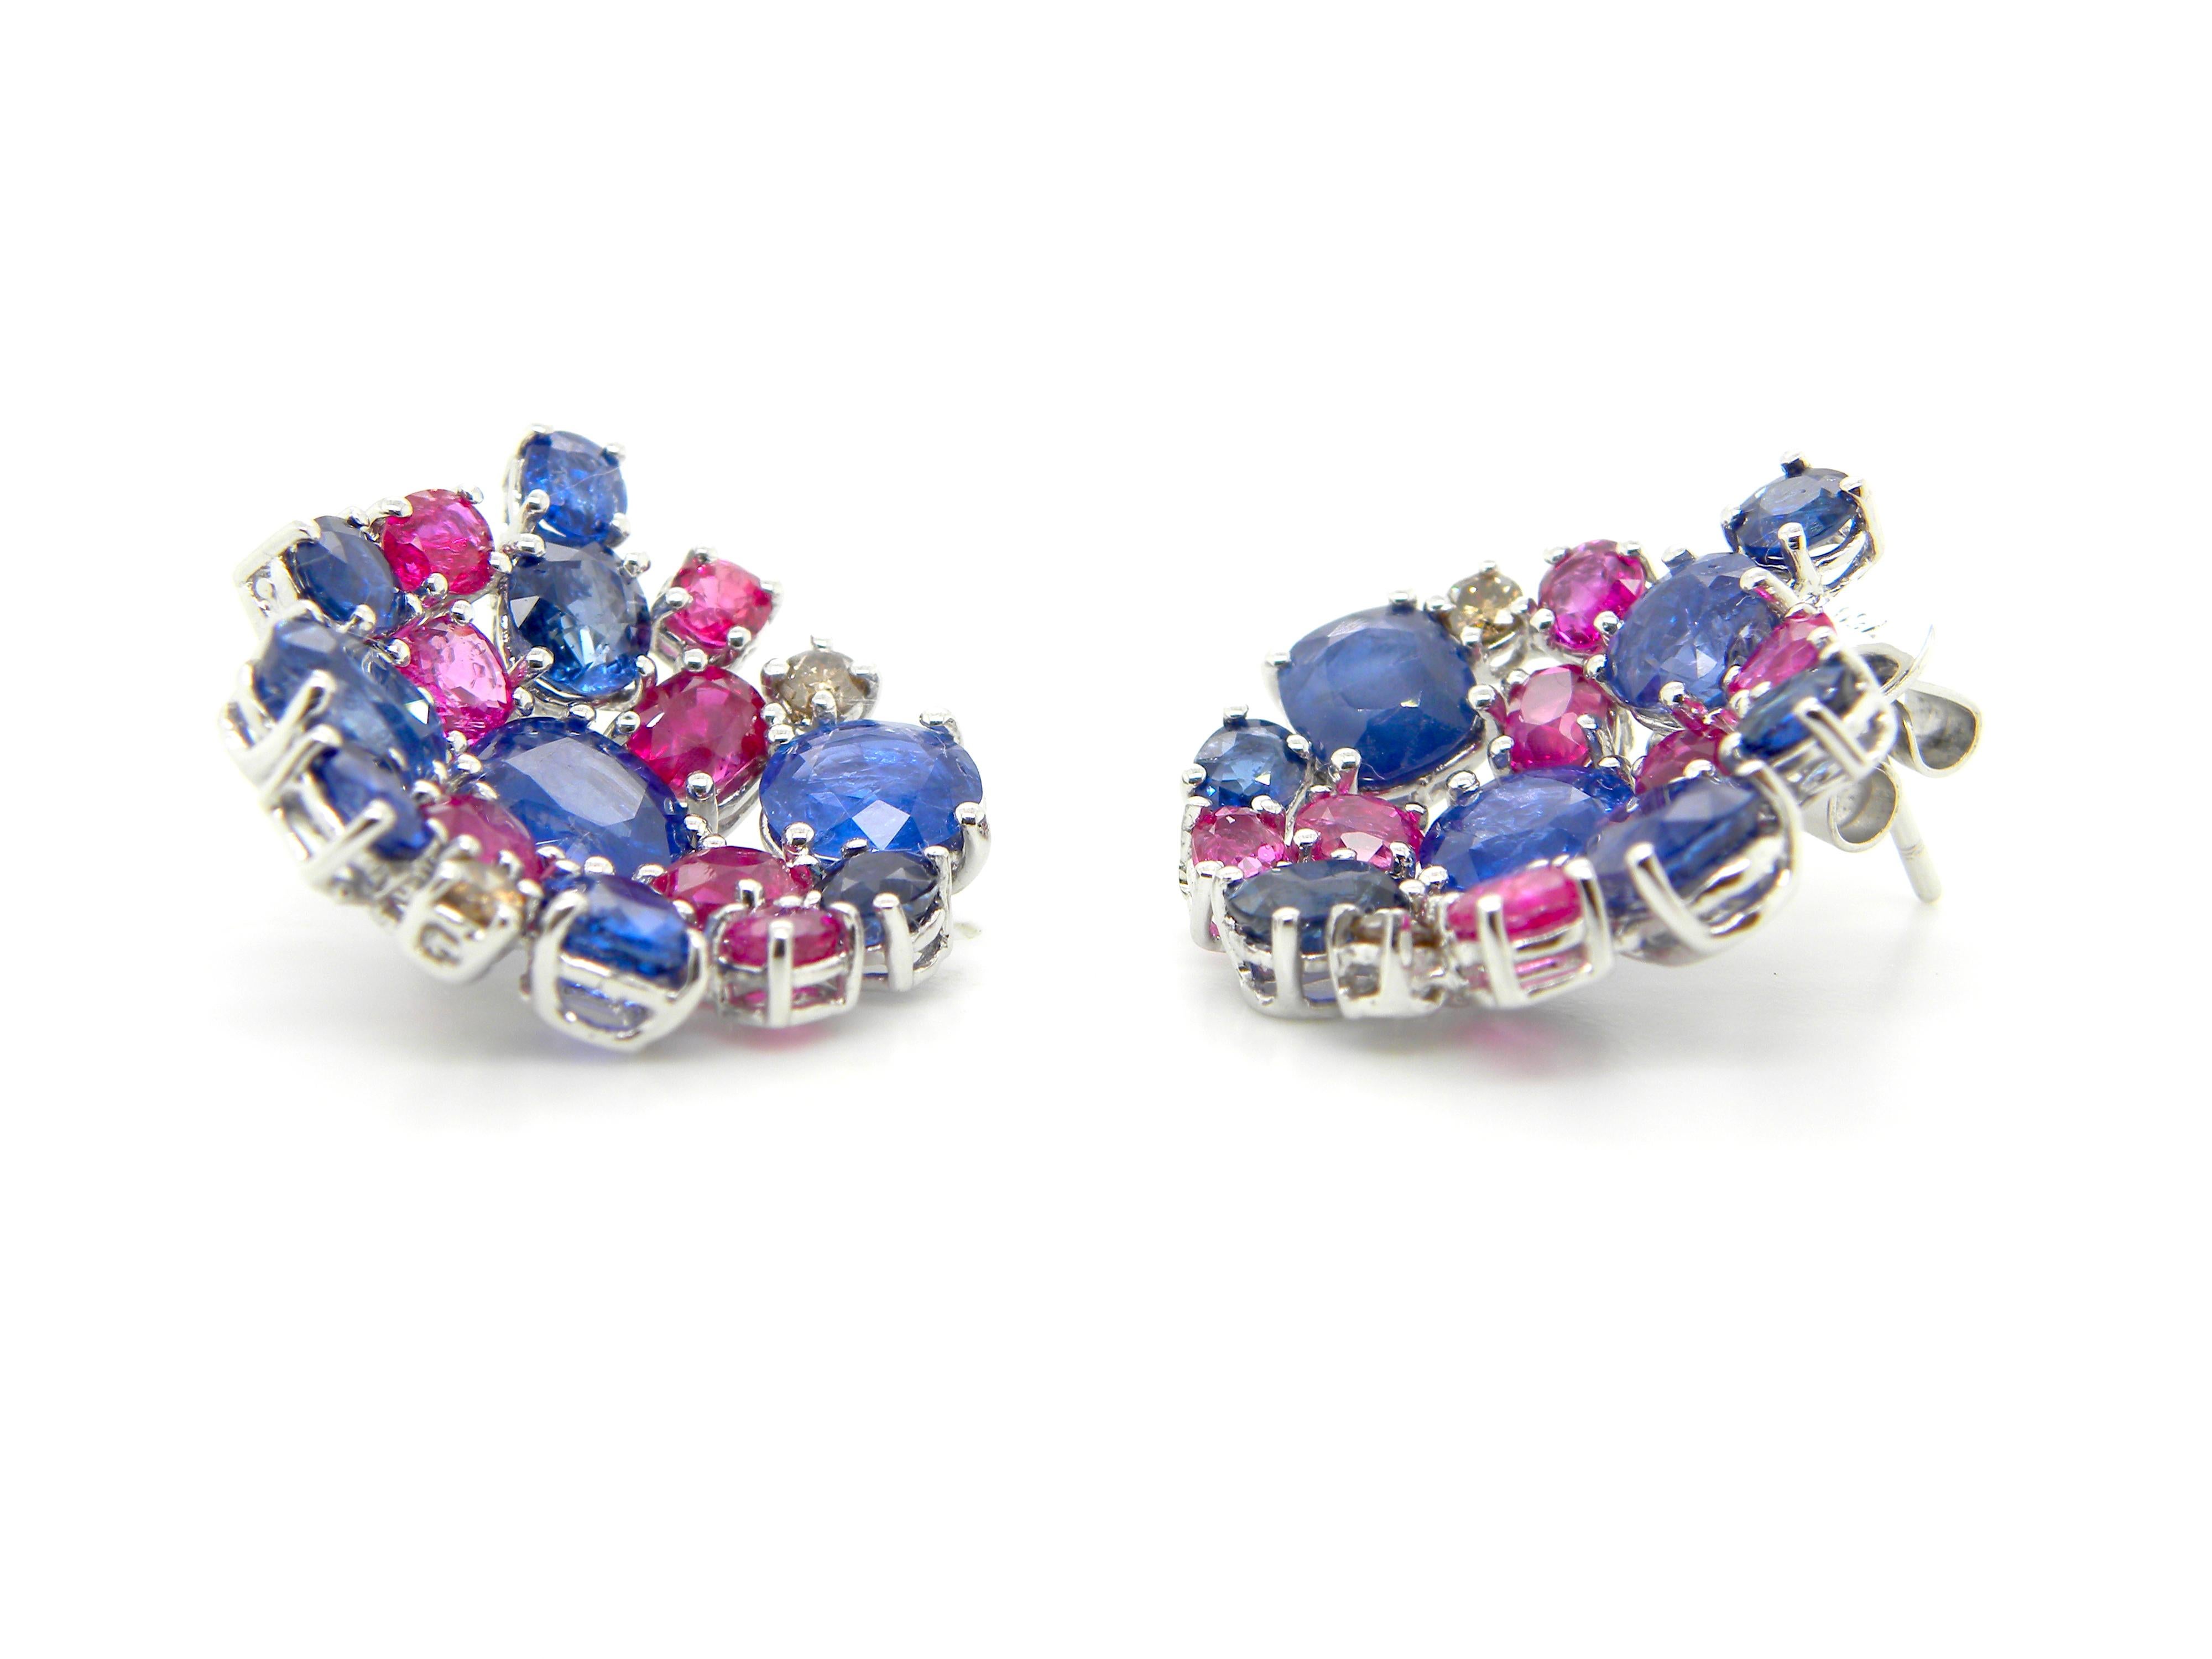 Women's or Men's 15.4 Carat Unheated Burmese Ruby and Blue Sapphire White Gold Cluster Earrings